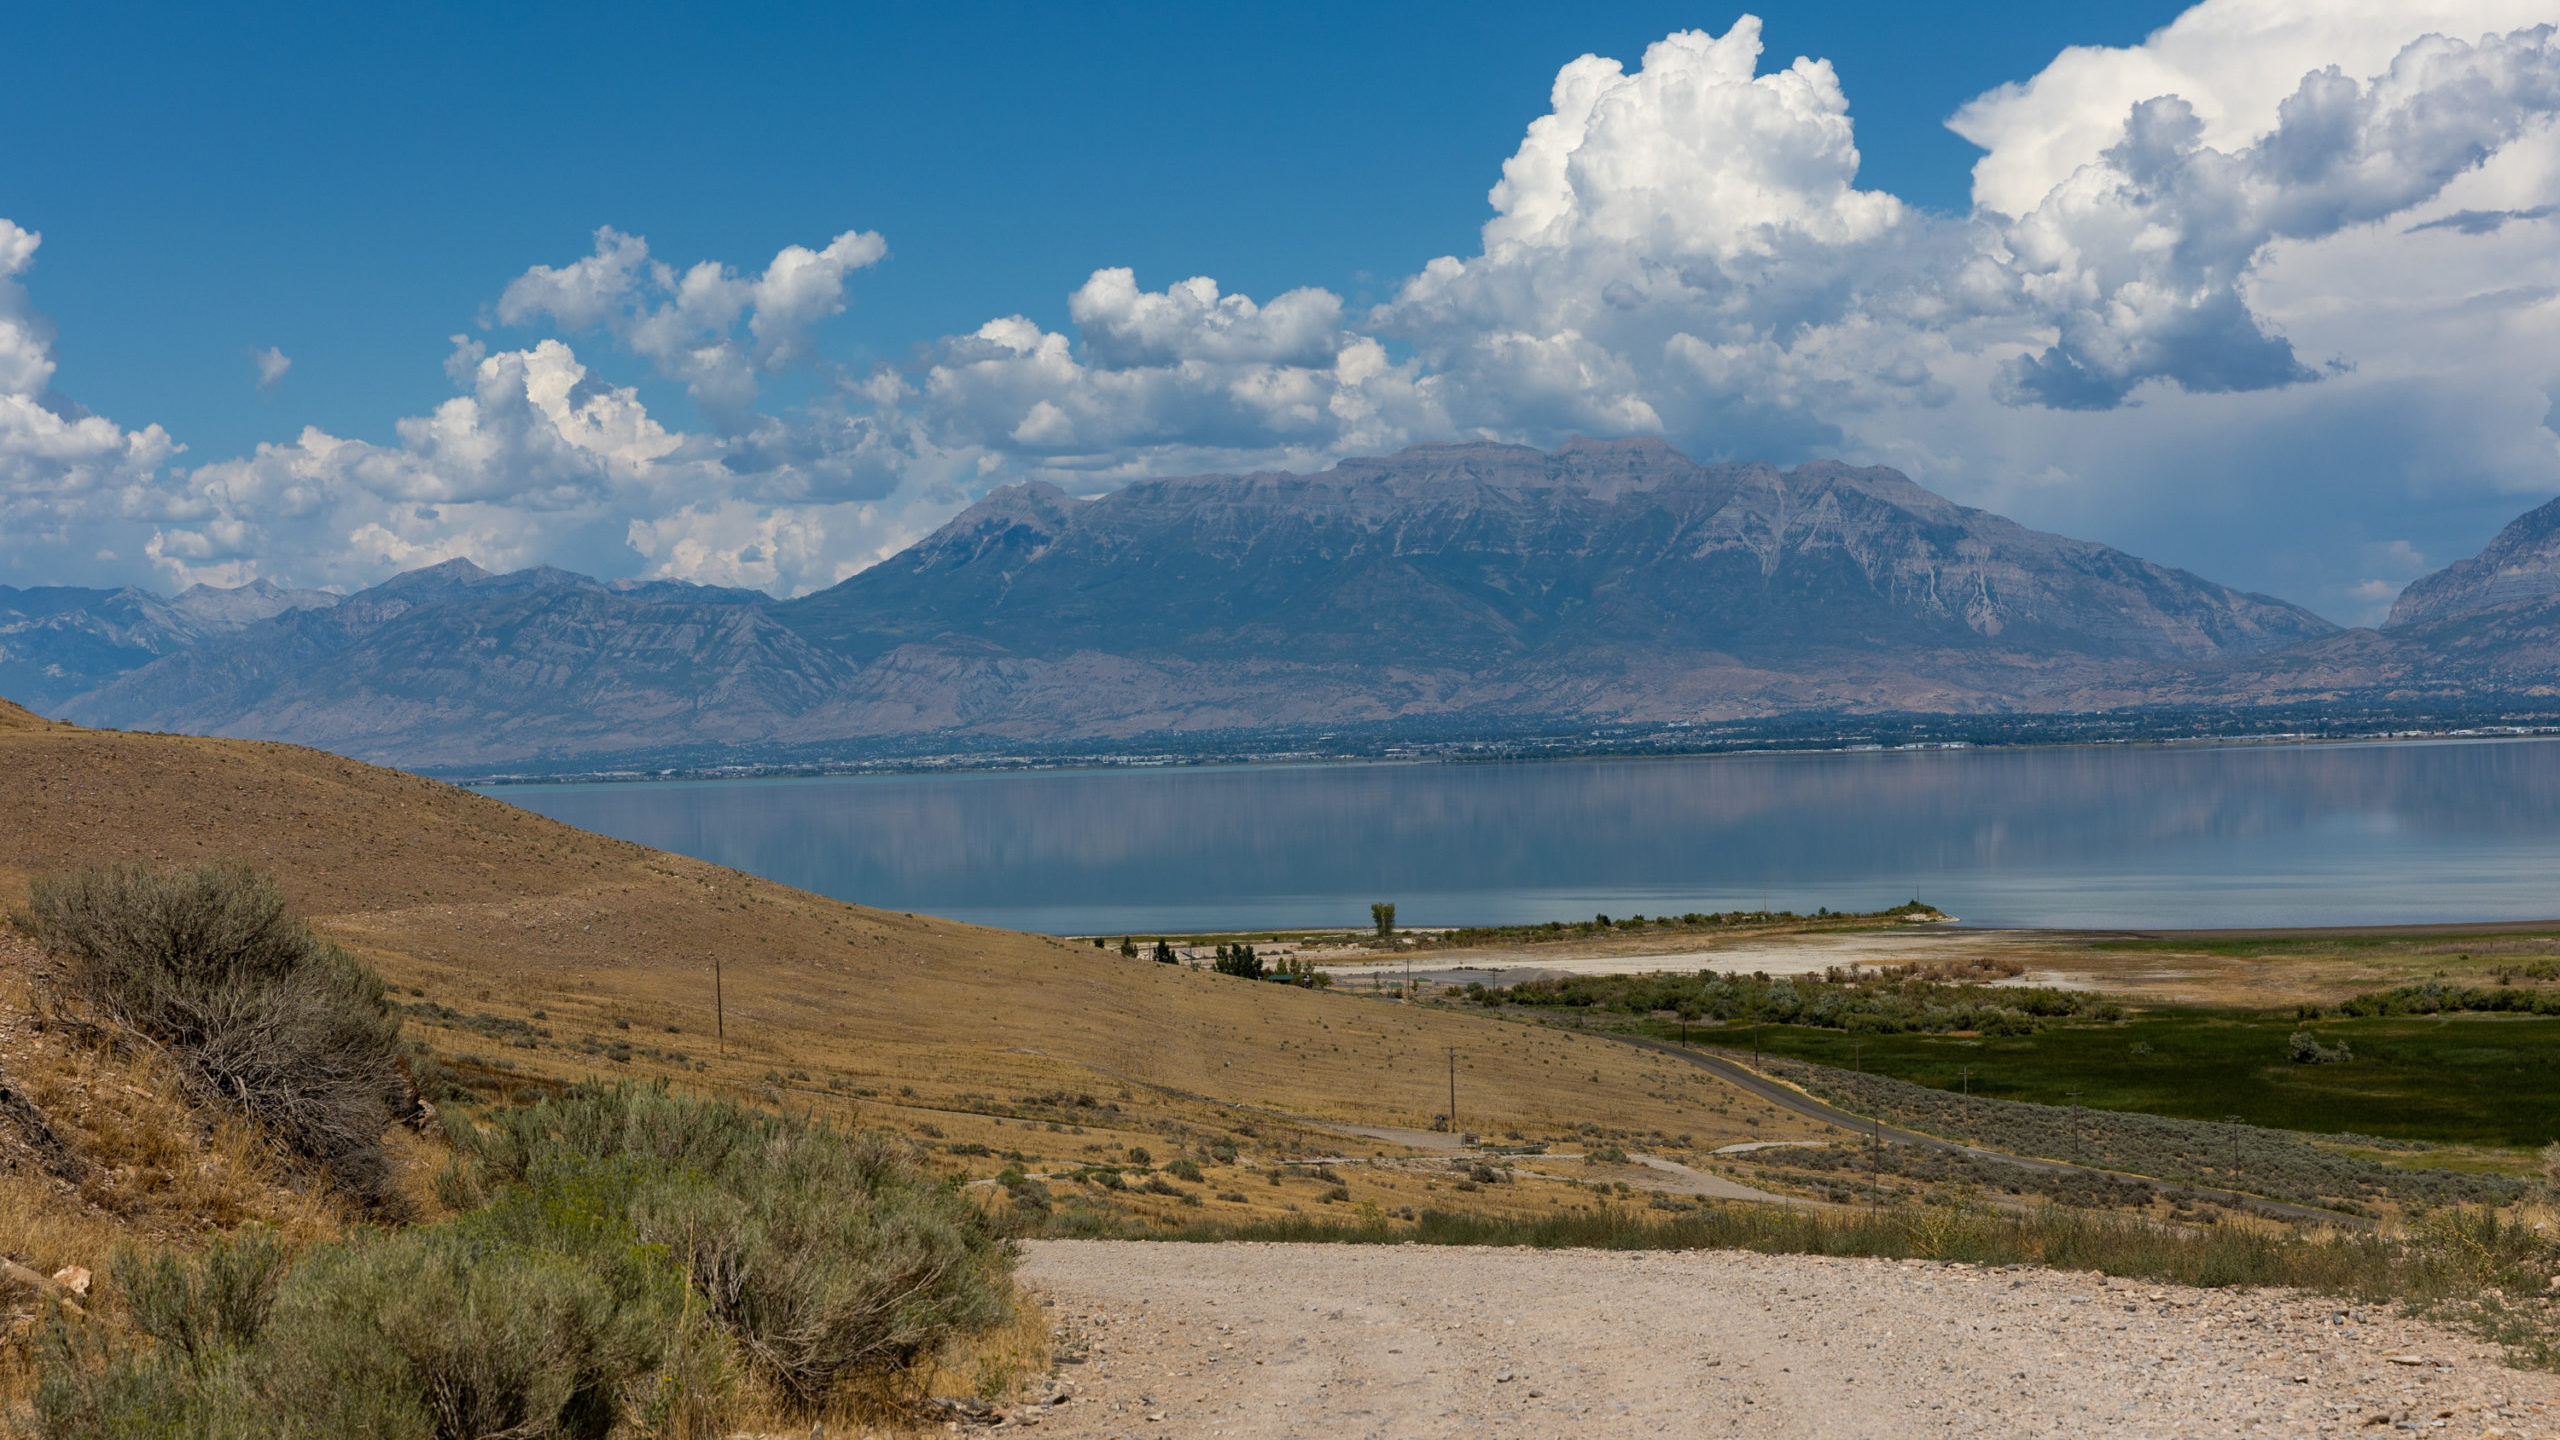 Lincoln Beach pictured. Two shooting at Utah Lake happened near this beach....